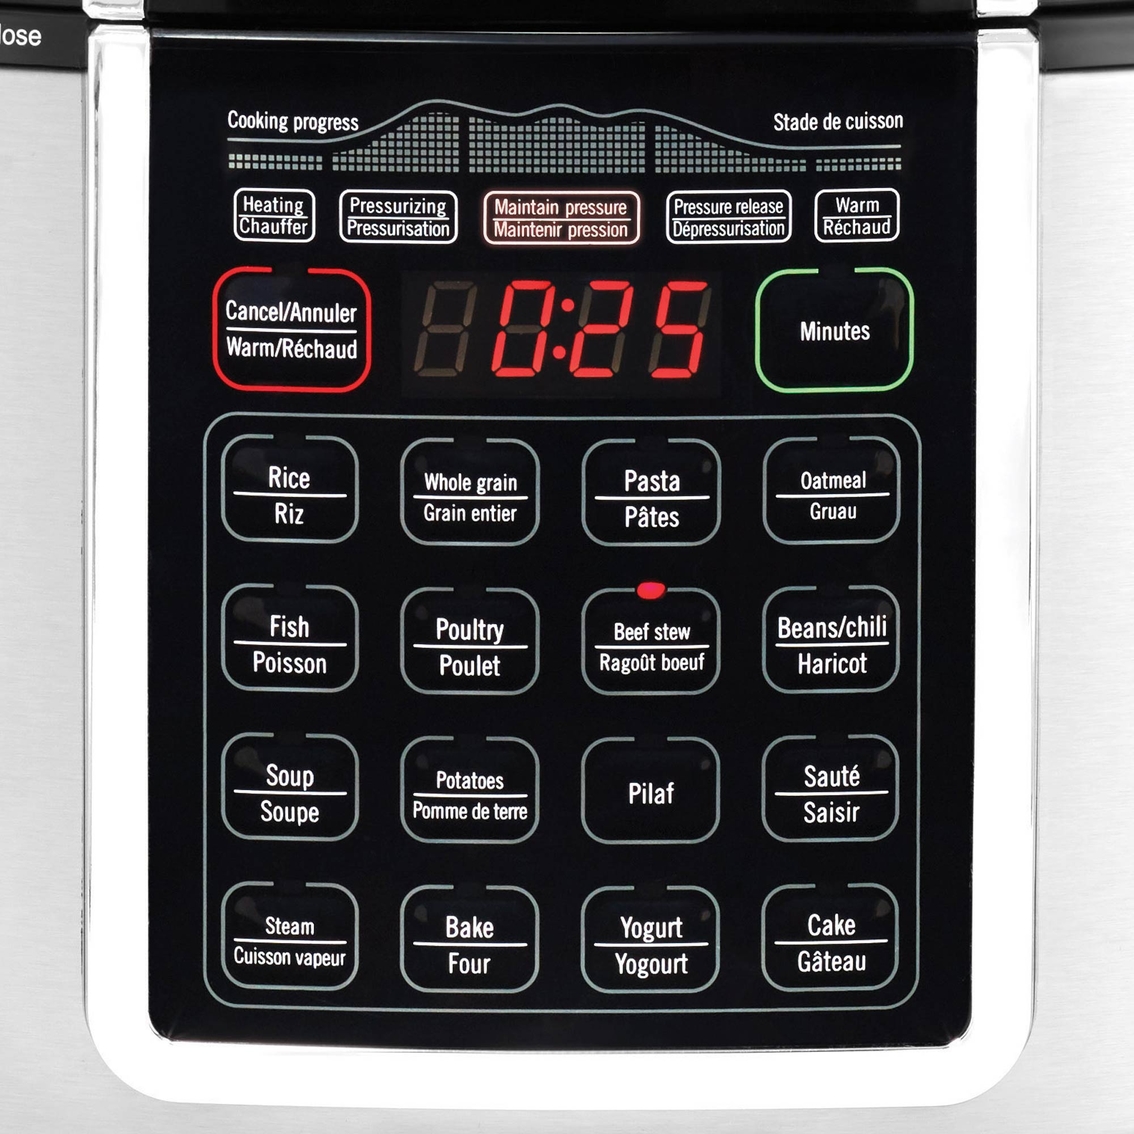 Starfrit Electric rice cooker 10-cups